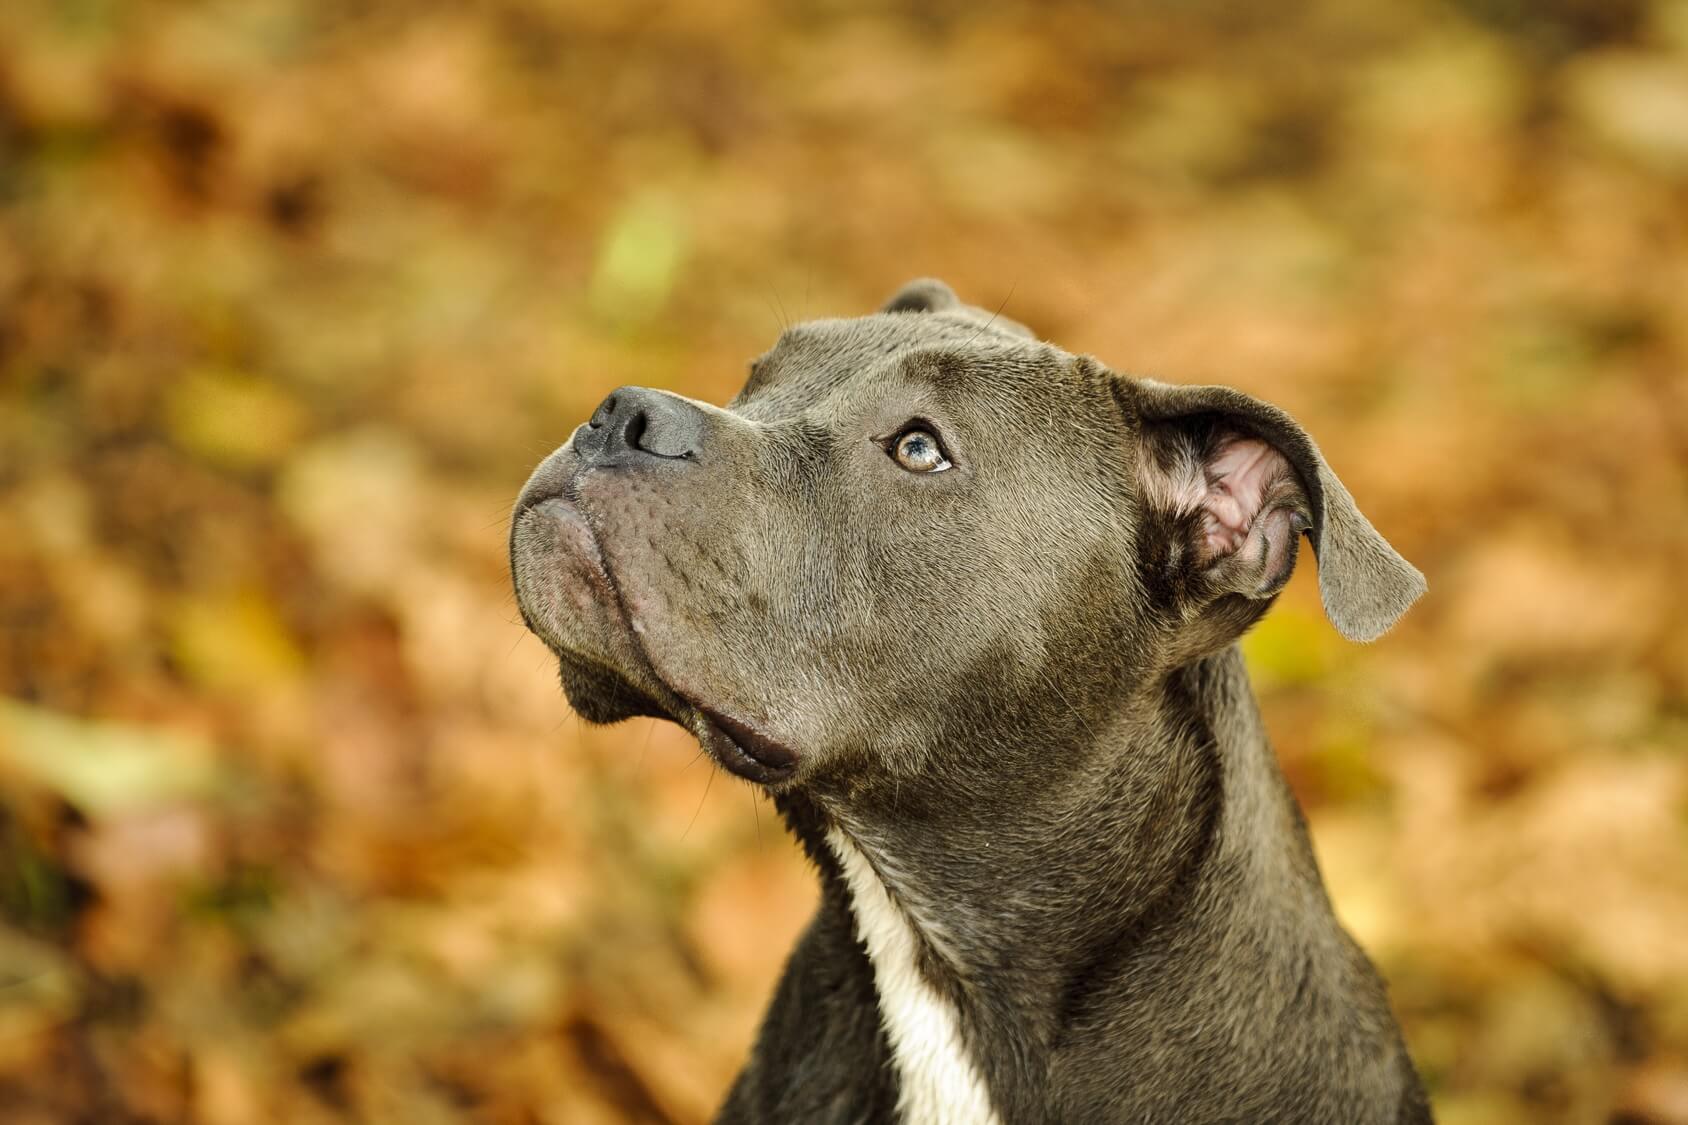 blue pitbull dogs for sale